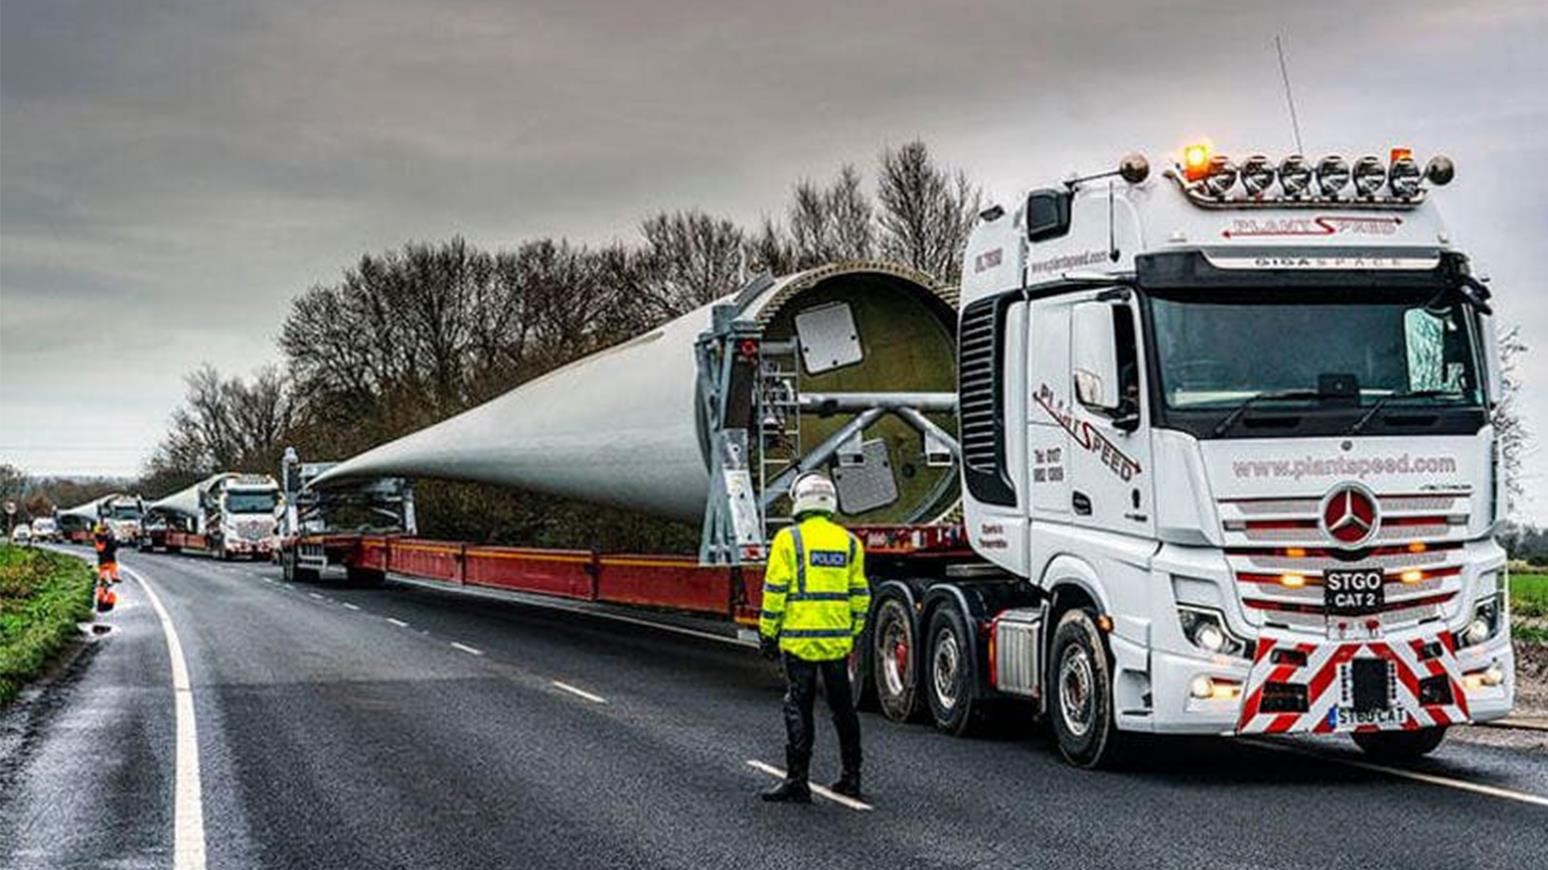 Bristol-Based Heavy Haulage Specialist Uses Nooteboom Super Wing Carrier Trailer To Move Record-Length Wind Turbine Blades